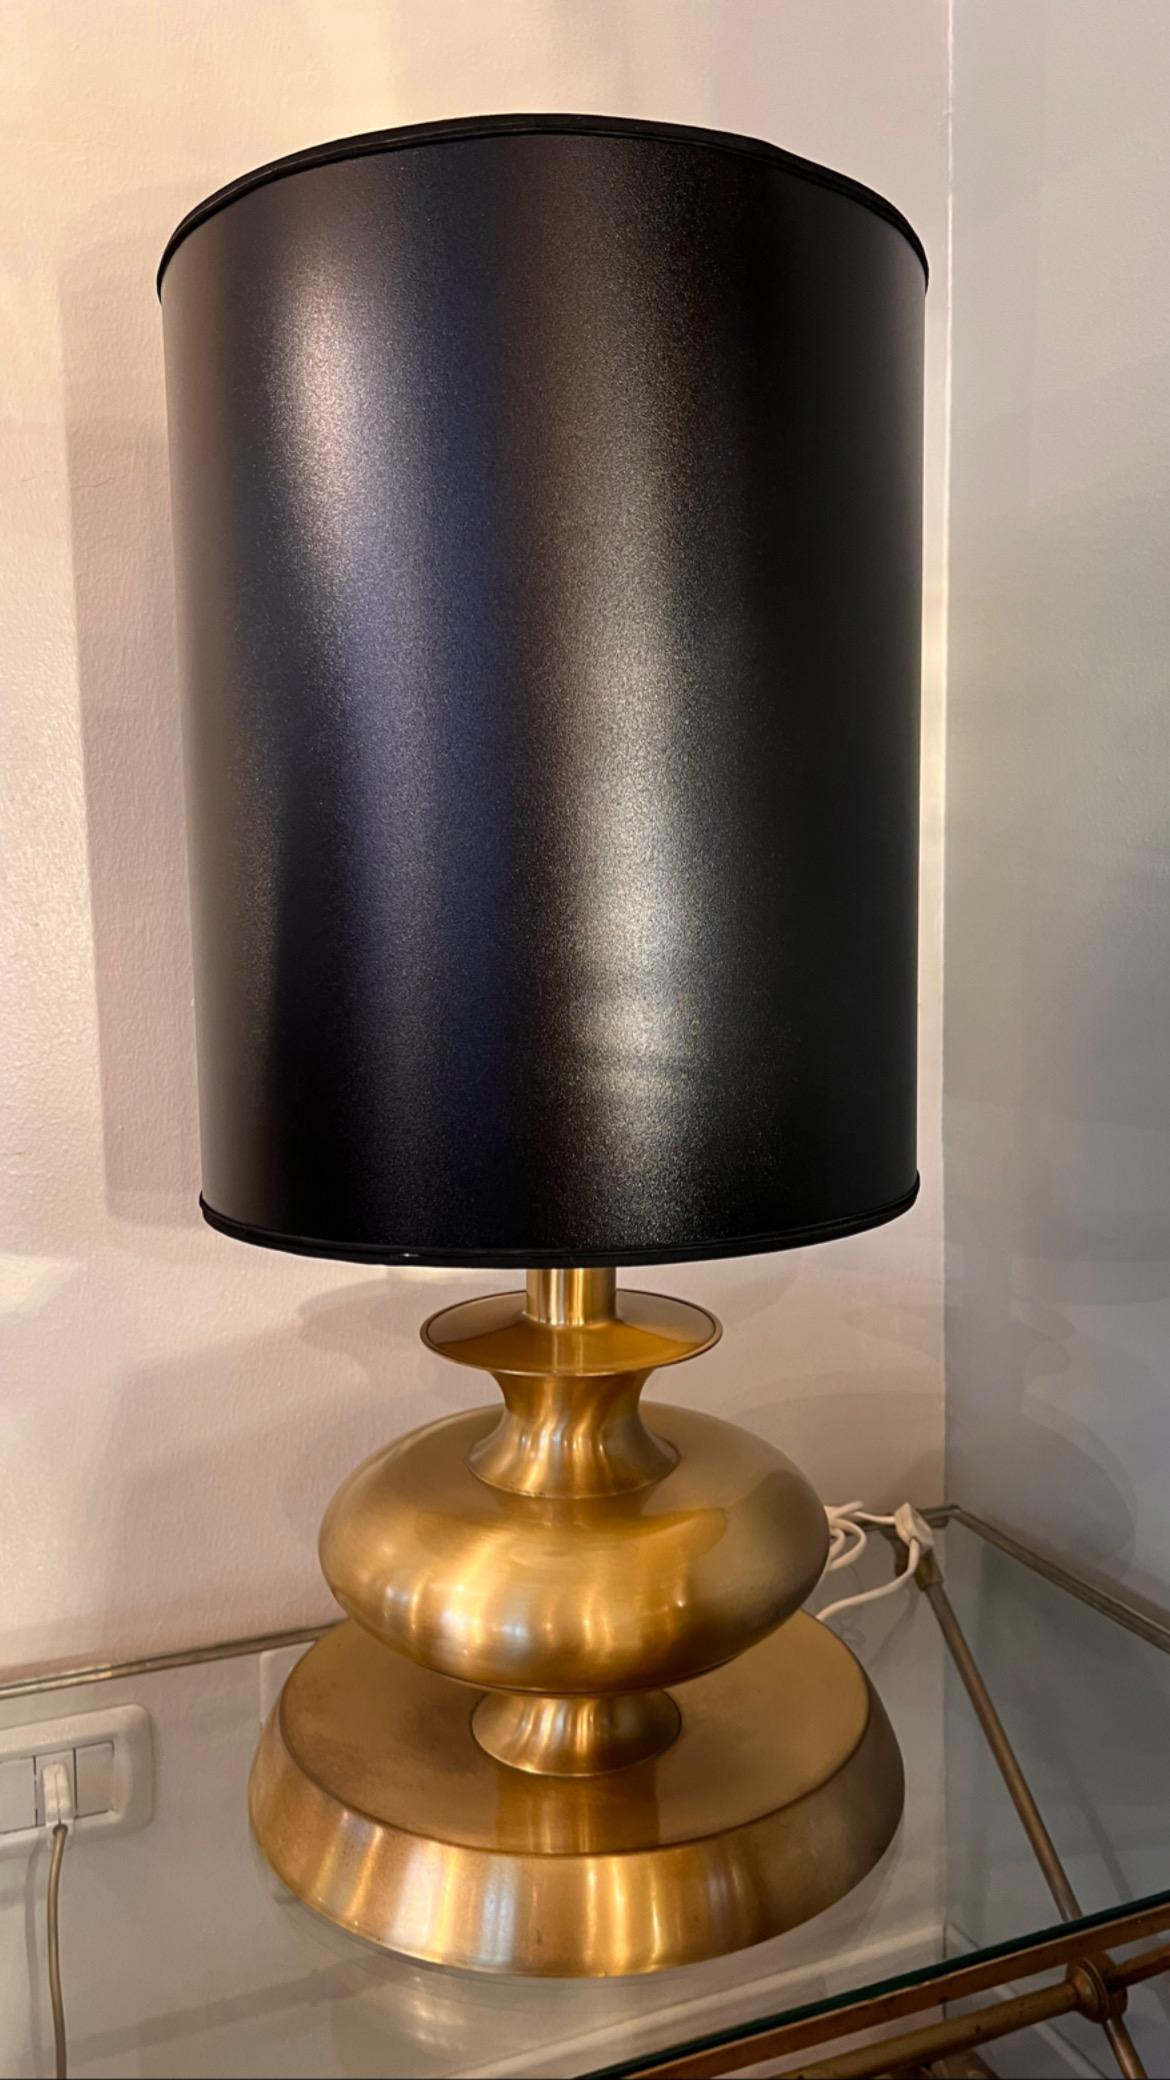 Gilded brass table lamp with black cylindrical lampshade from the 70s.

Measurements: base 17 x 17 cm, height with lampshade 85 cm.